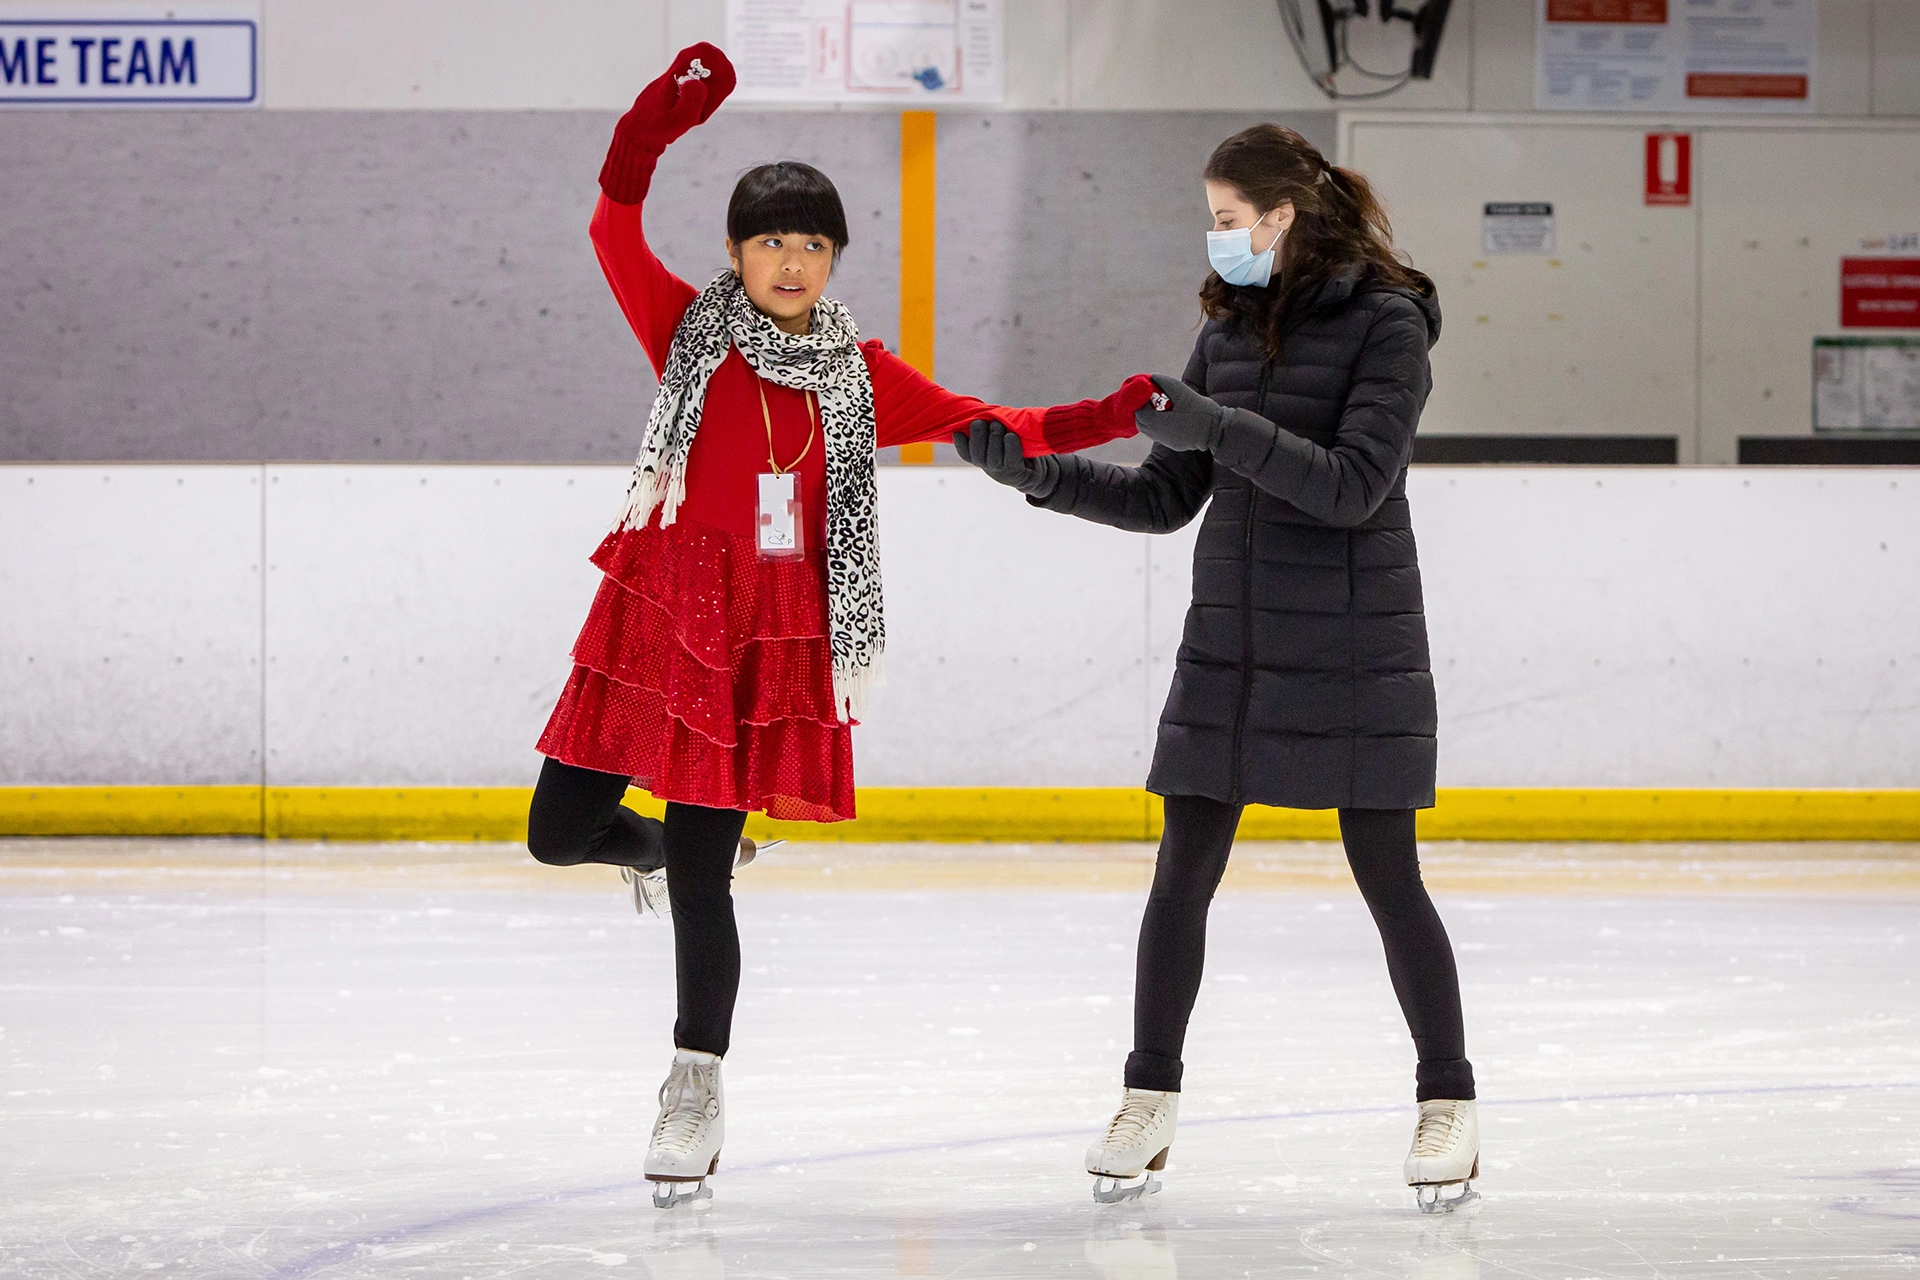 Two girls are skating on an ice rink with masks on.